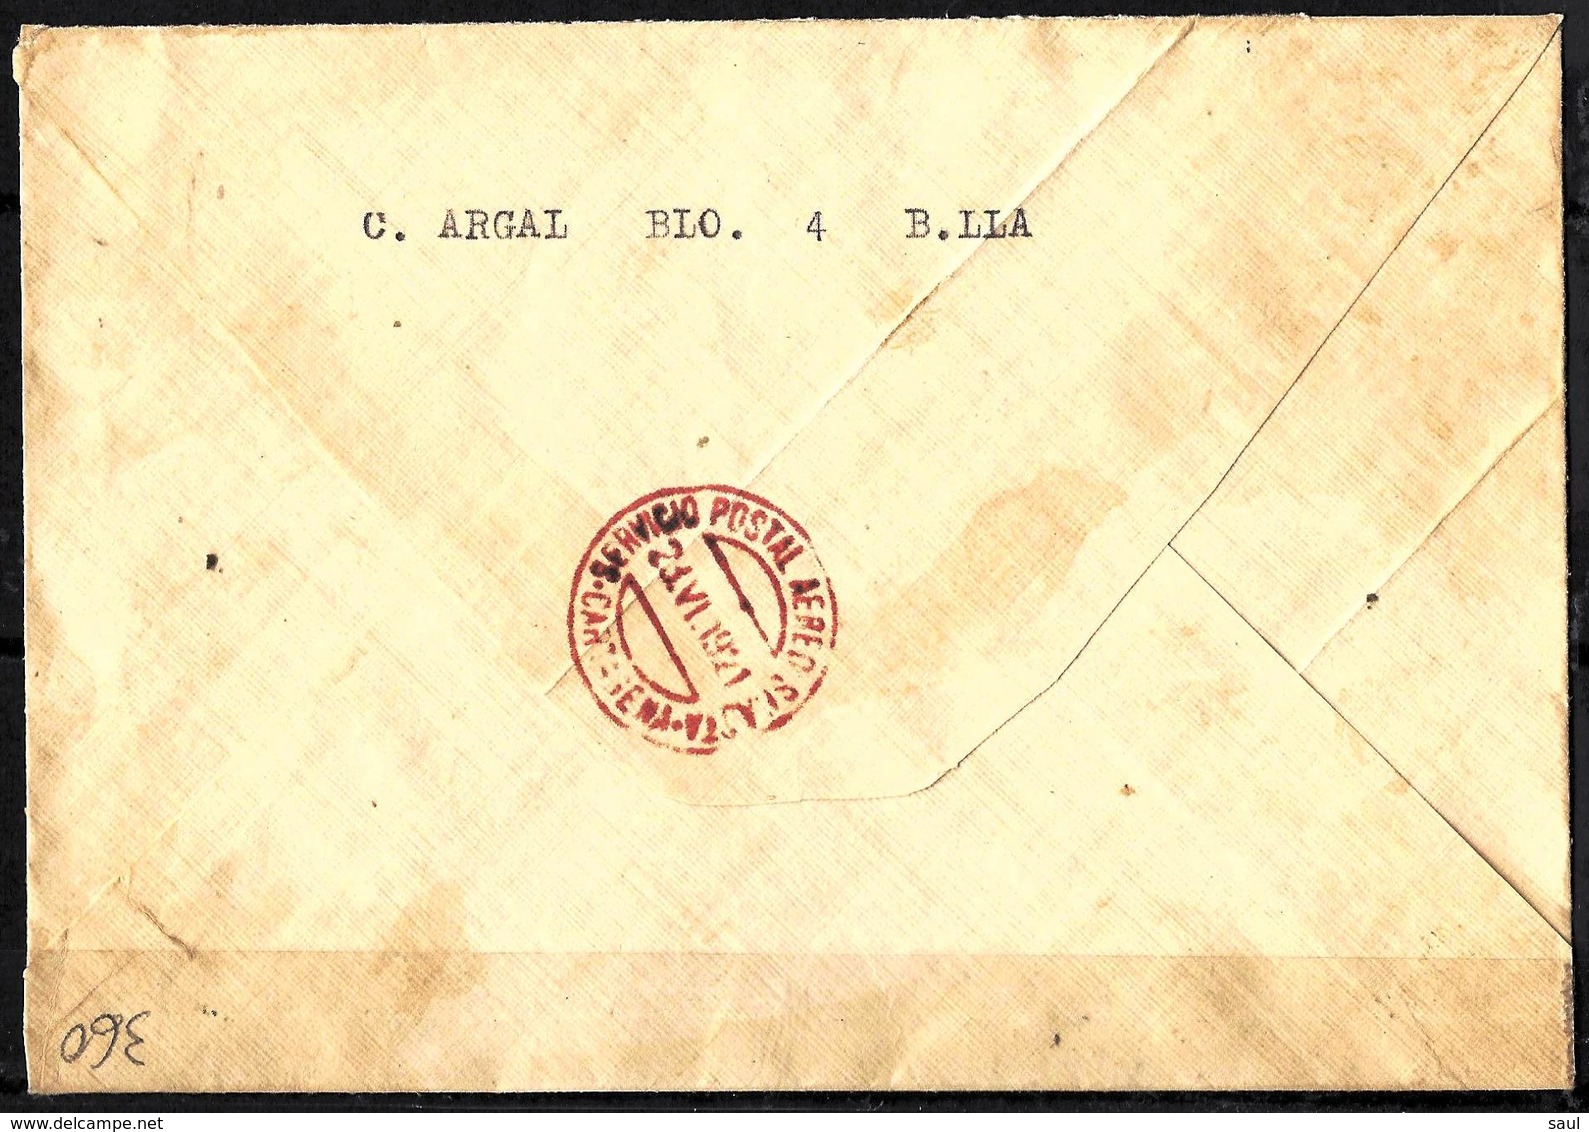 360 - COLOMBIA - 1921 - AIR MAIL - COVER - RARE SCADTA LABEL - TO CHECK - Unclassified